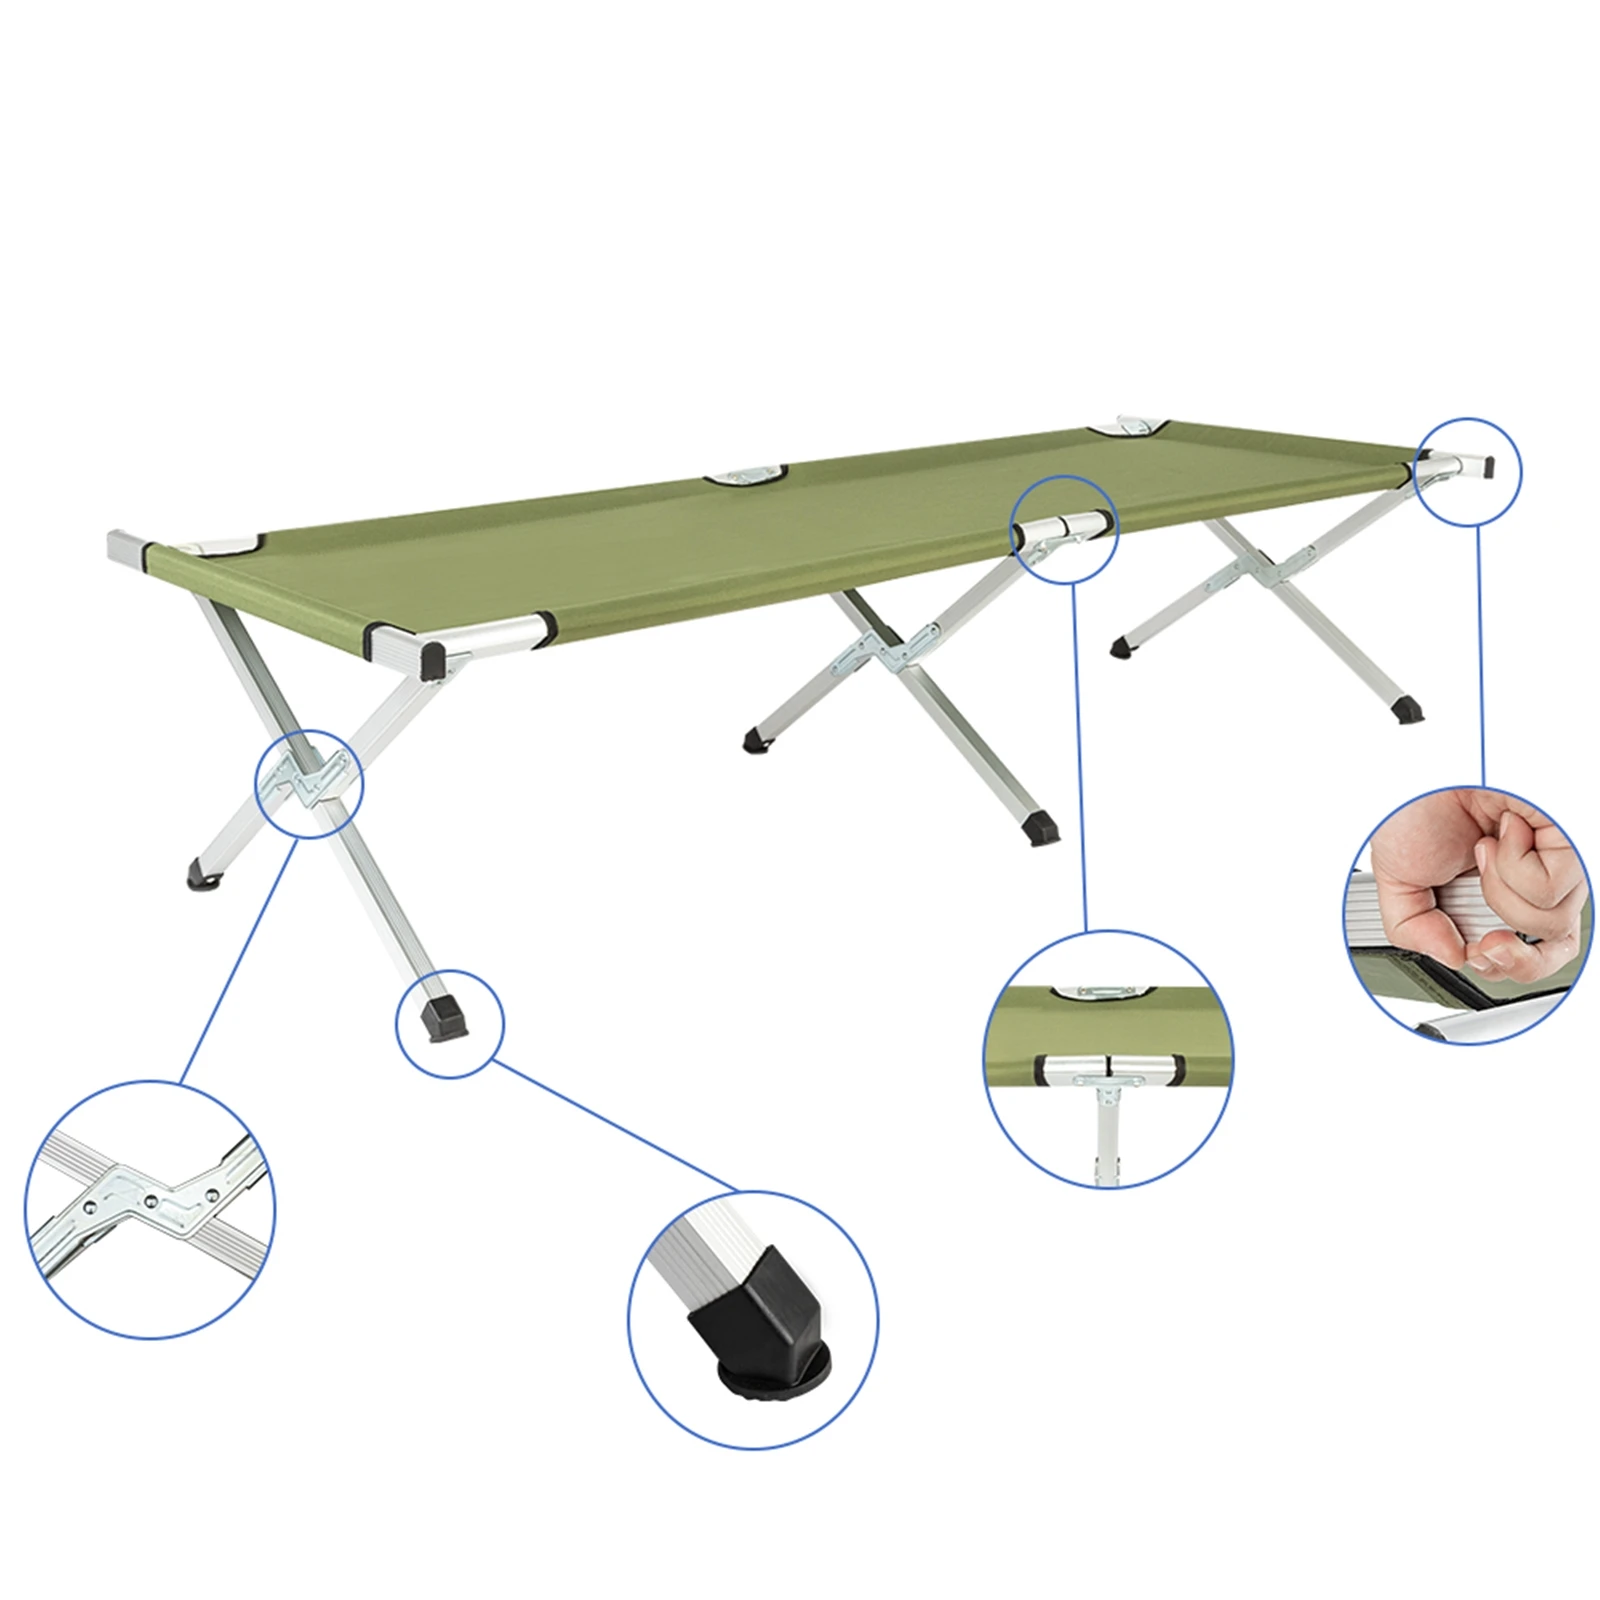 Outdoor Foldable Camping RHB-03A Portable Folding Camping Cot with Carrying Bag Army Green